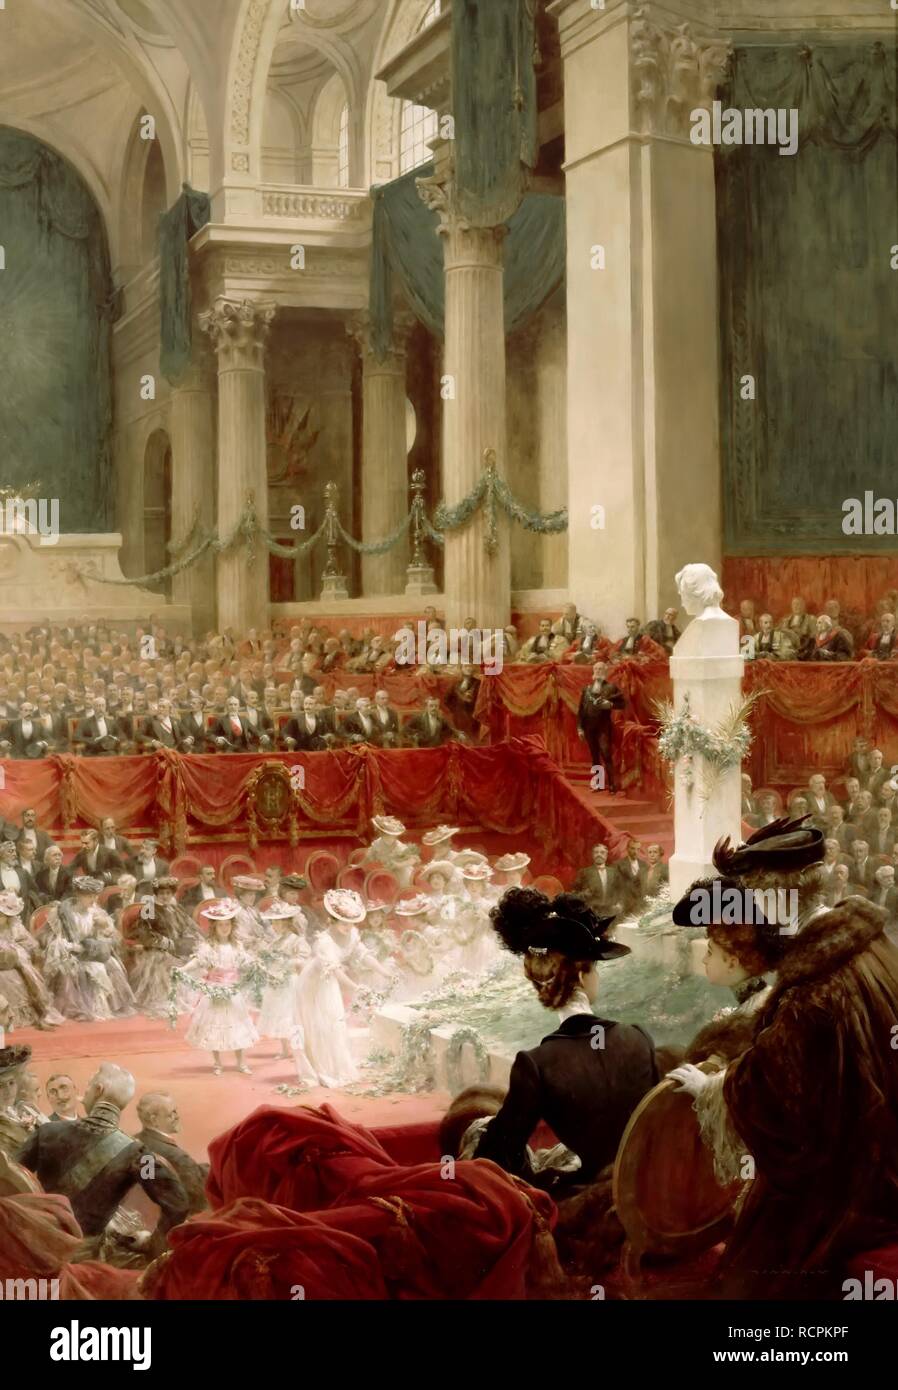 Celebration of the 100th Birthday of Victor Hugo at the Panthéon in Presence of the President Félix Loubet, 26 February 1902. Museum: Musée de l'Histoire de France, Château de Versailles. Author: CHARTRAN, THEOBALD. Stock Photo